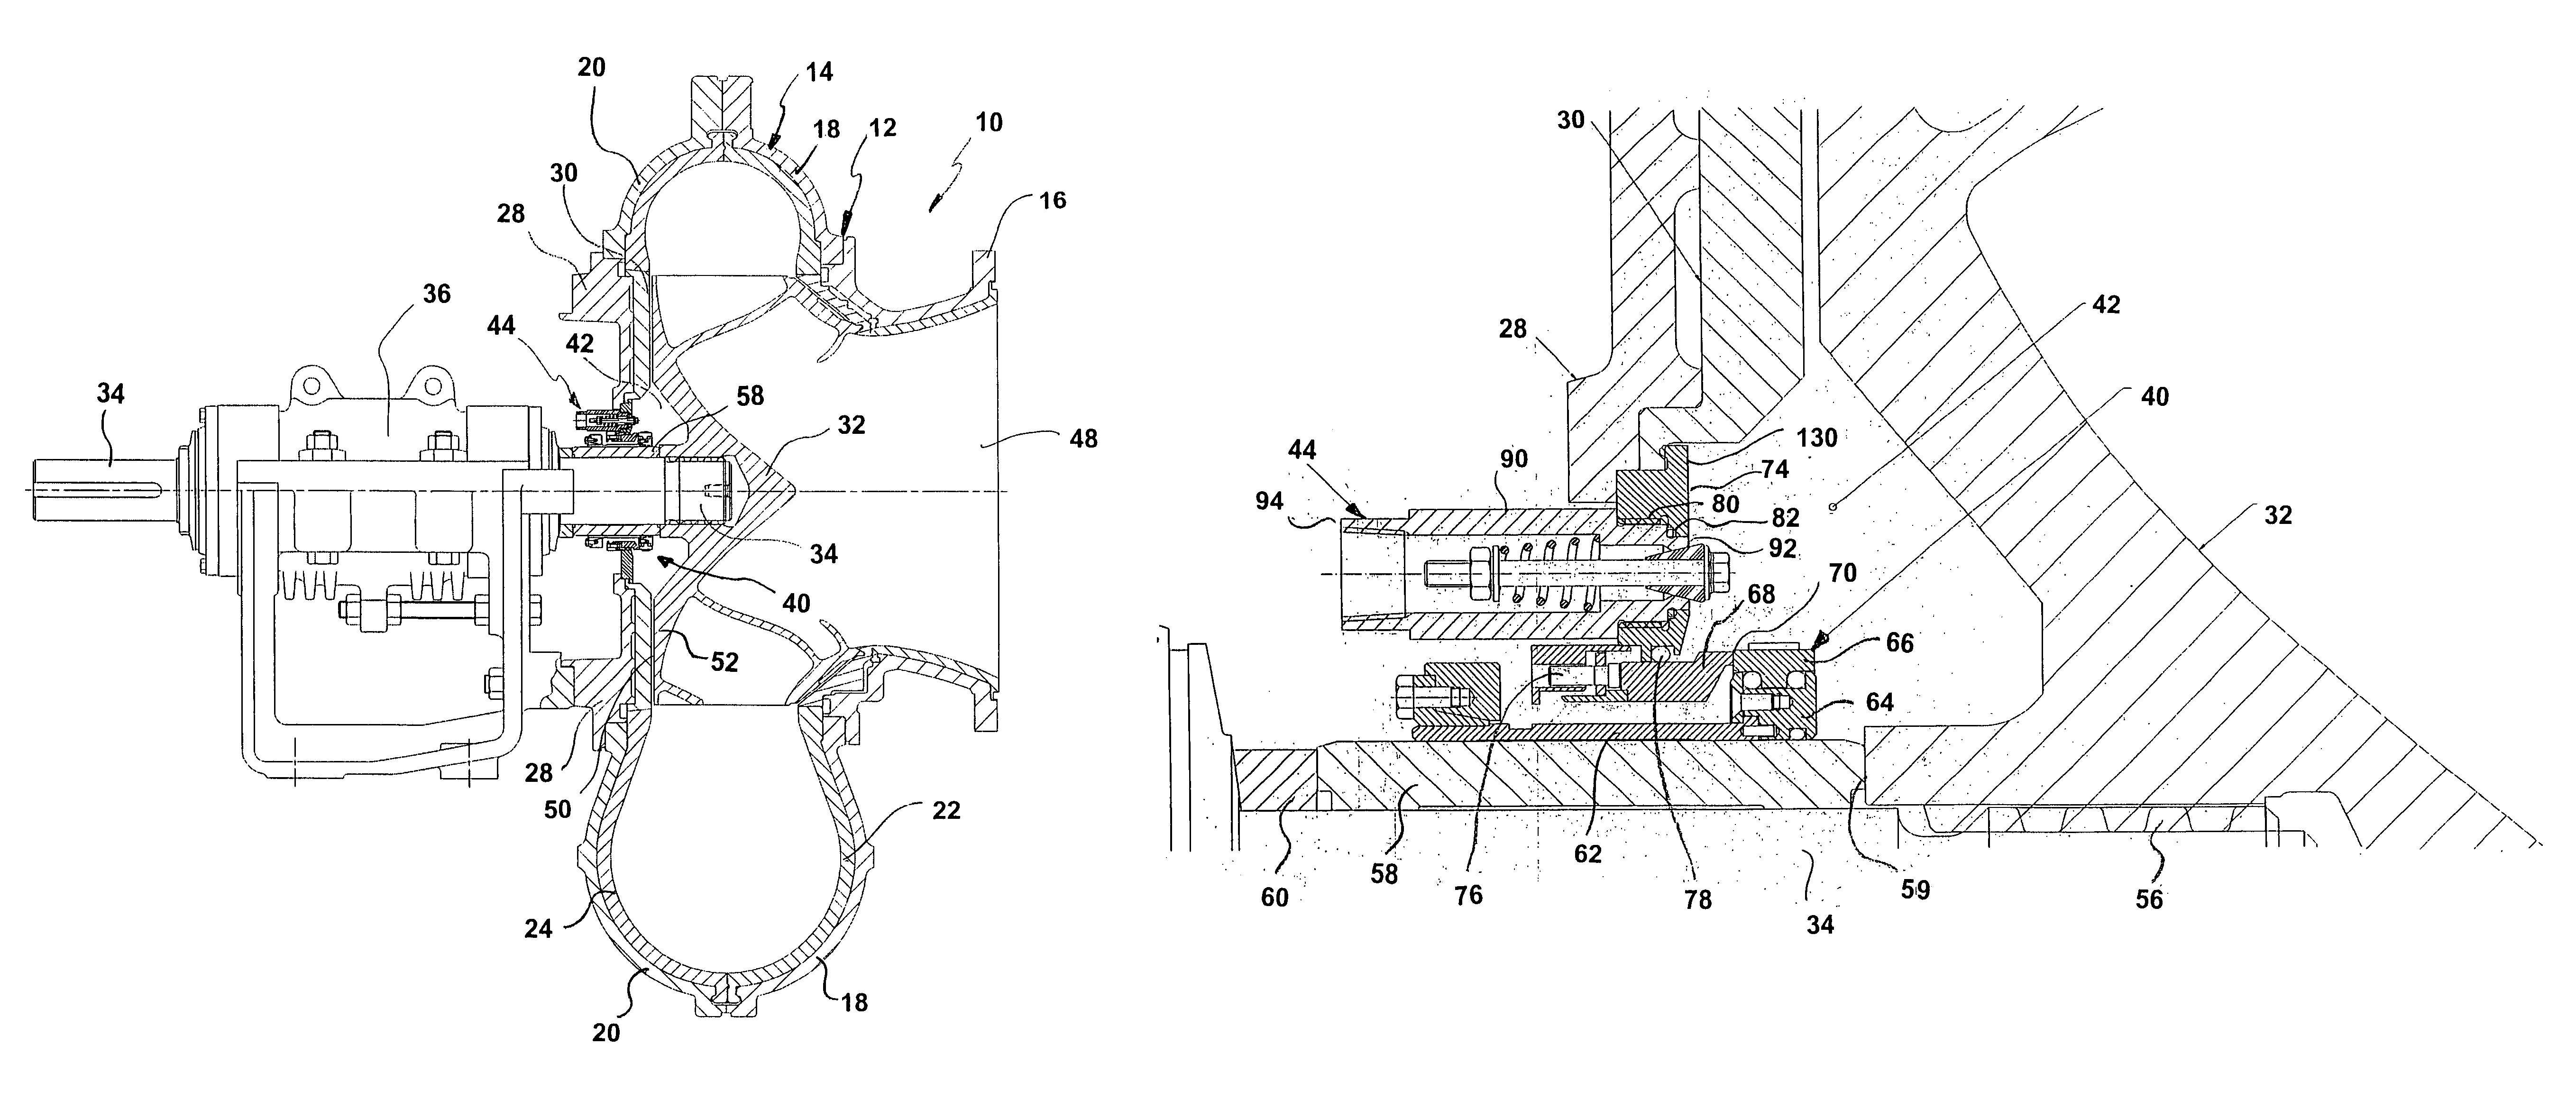 Seal chamber conditioning valve for a rotodynamic pump